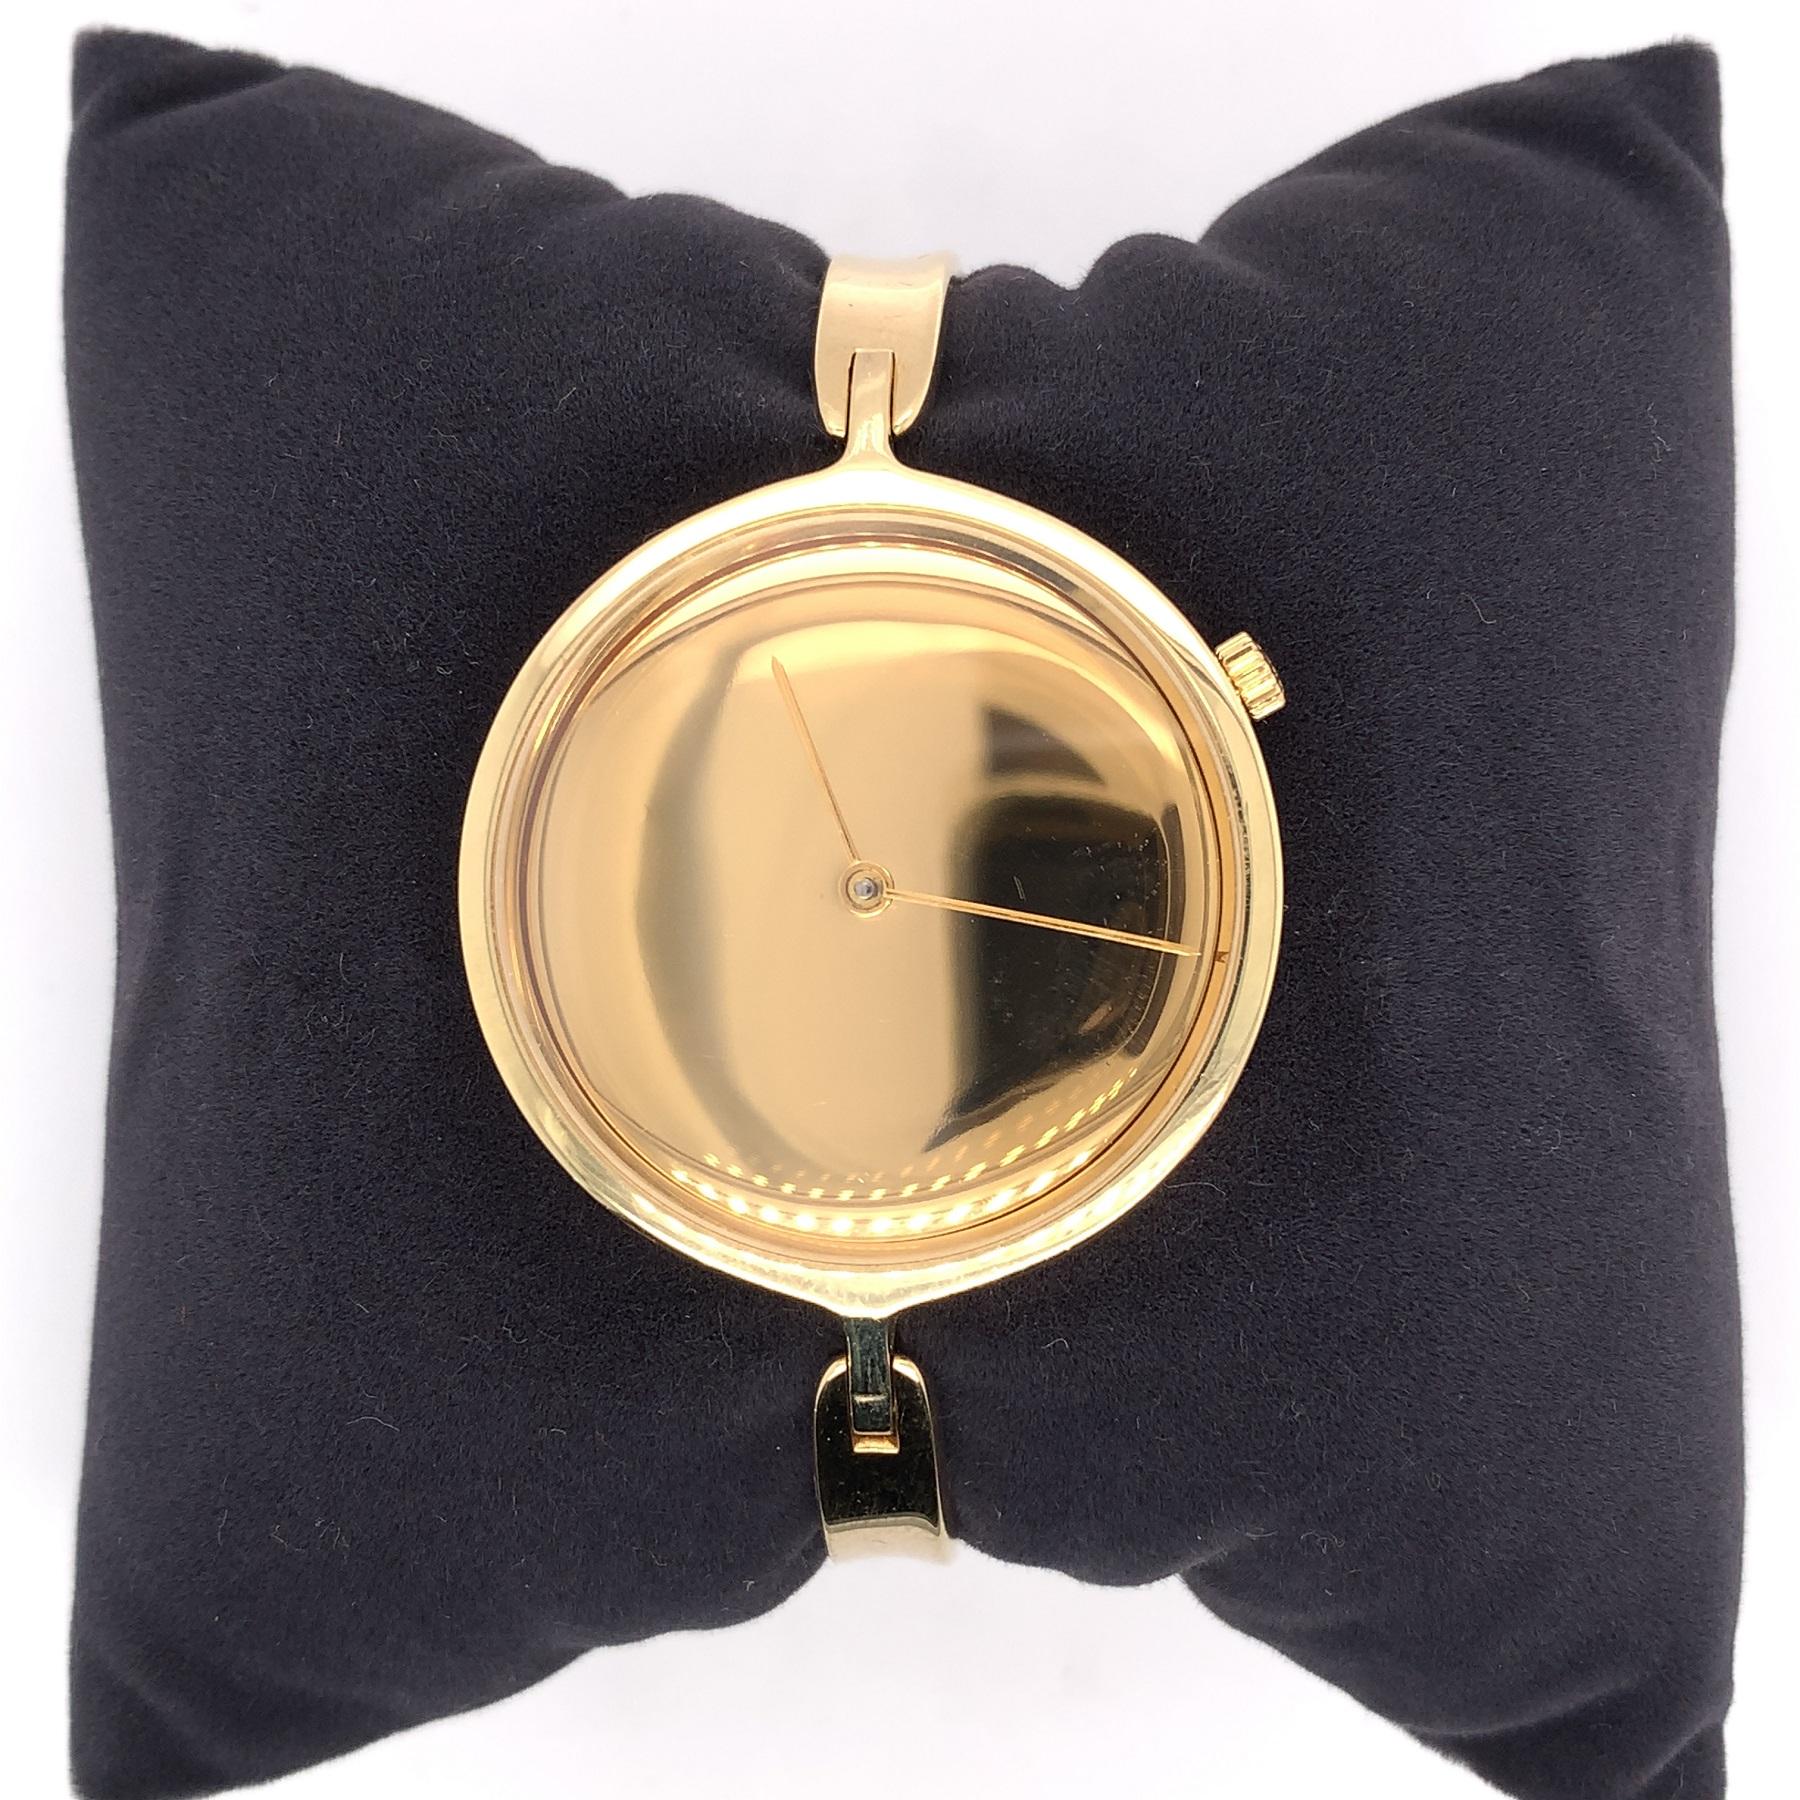 18K yellow gold Georg Jensen bangle watch #1227 designed by Vivianna Torun. The watch weighs 38.55dwt. The top with face is 1 3/8